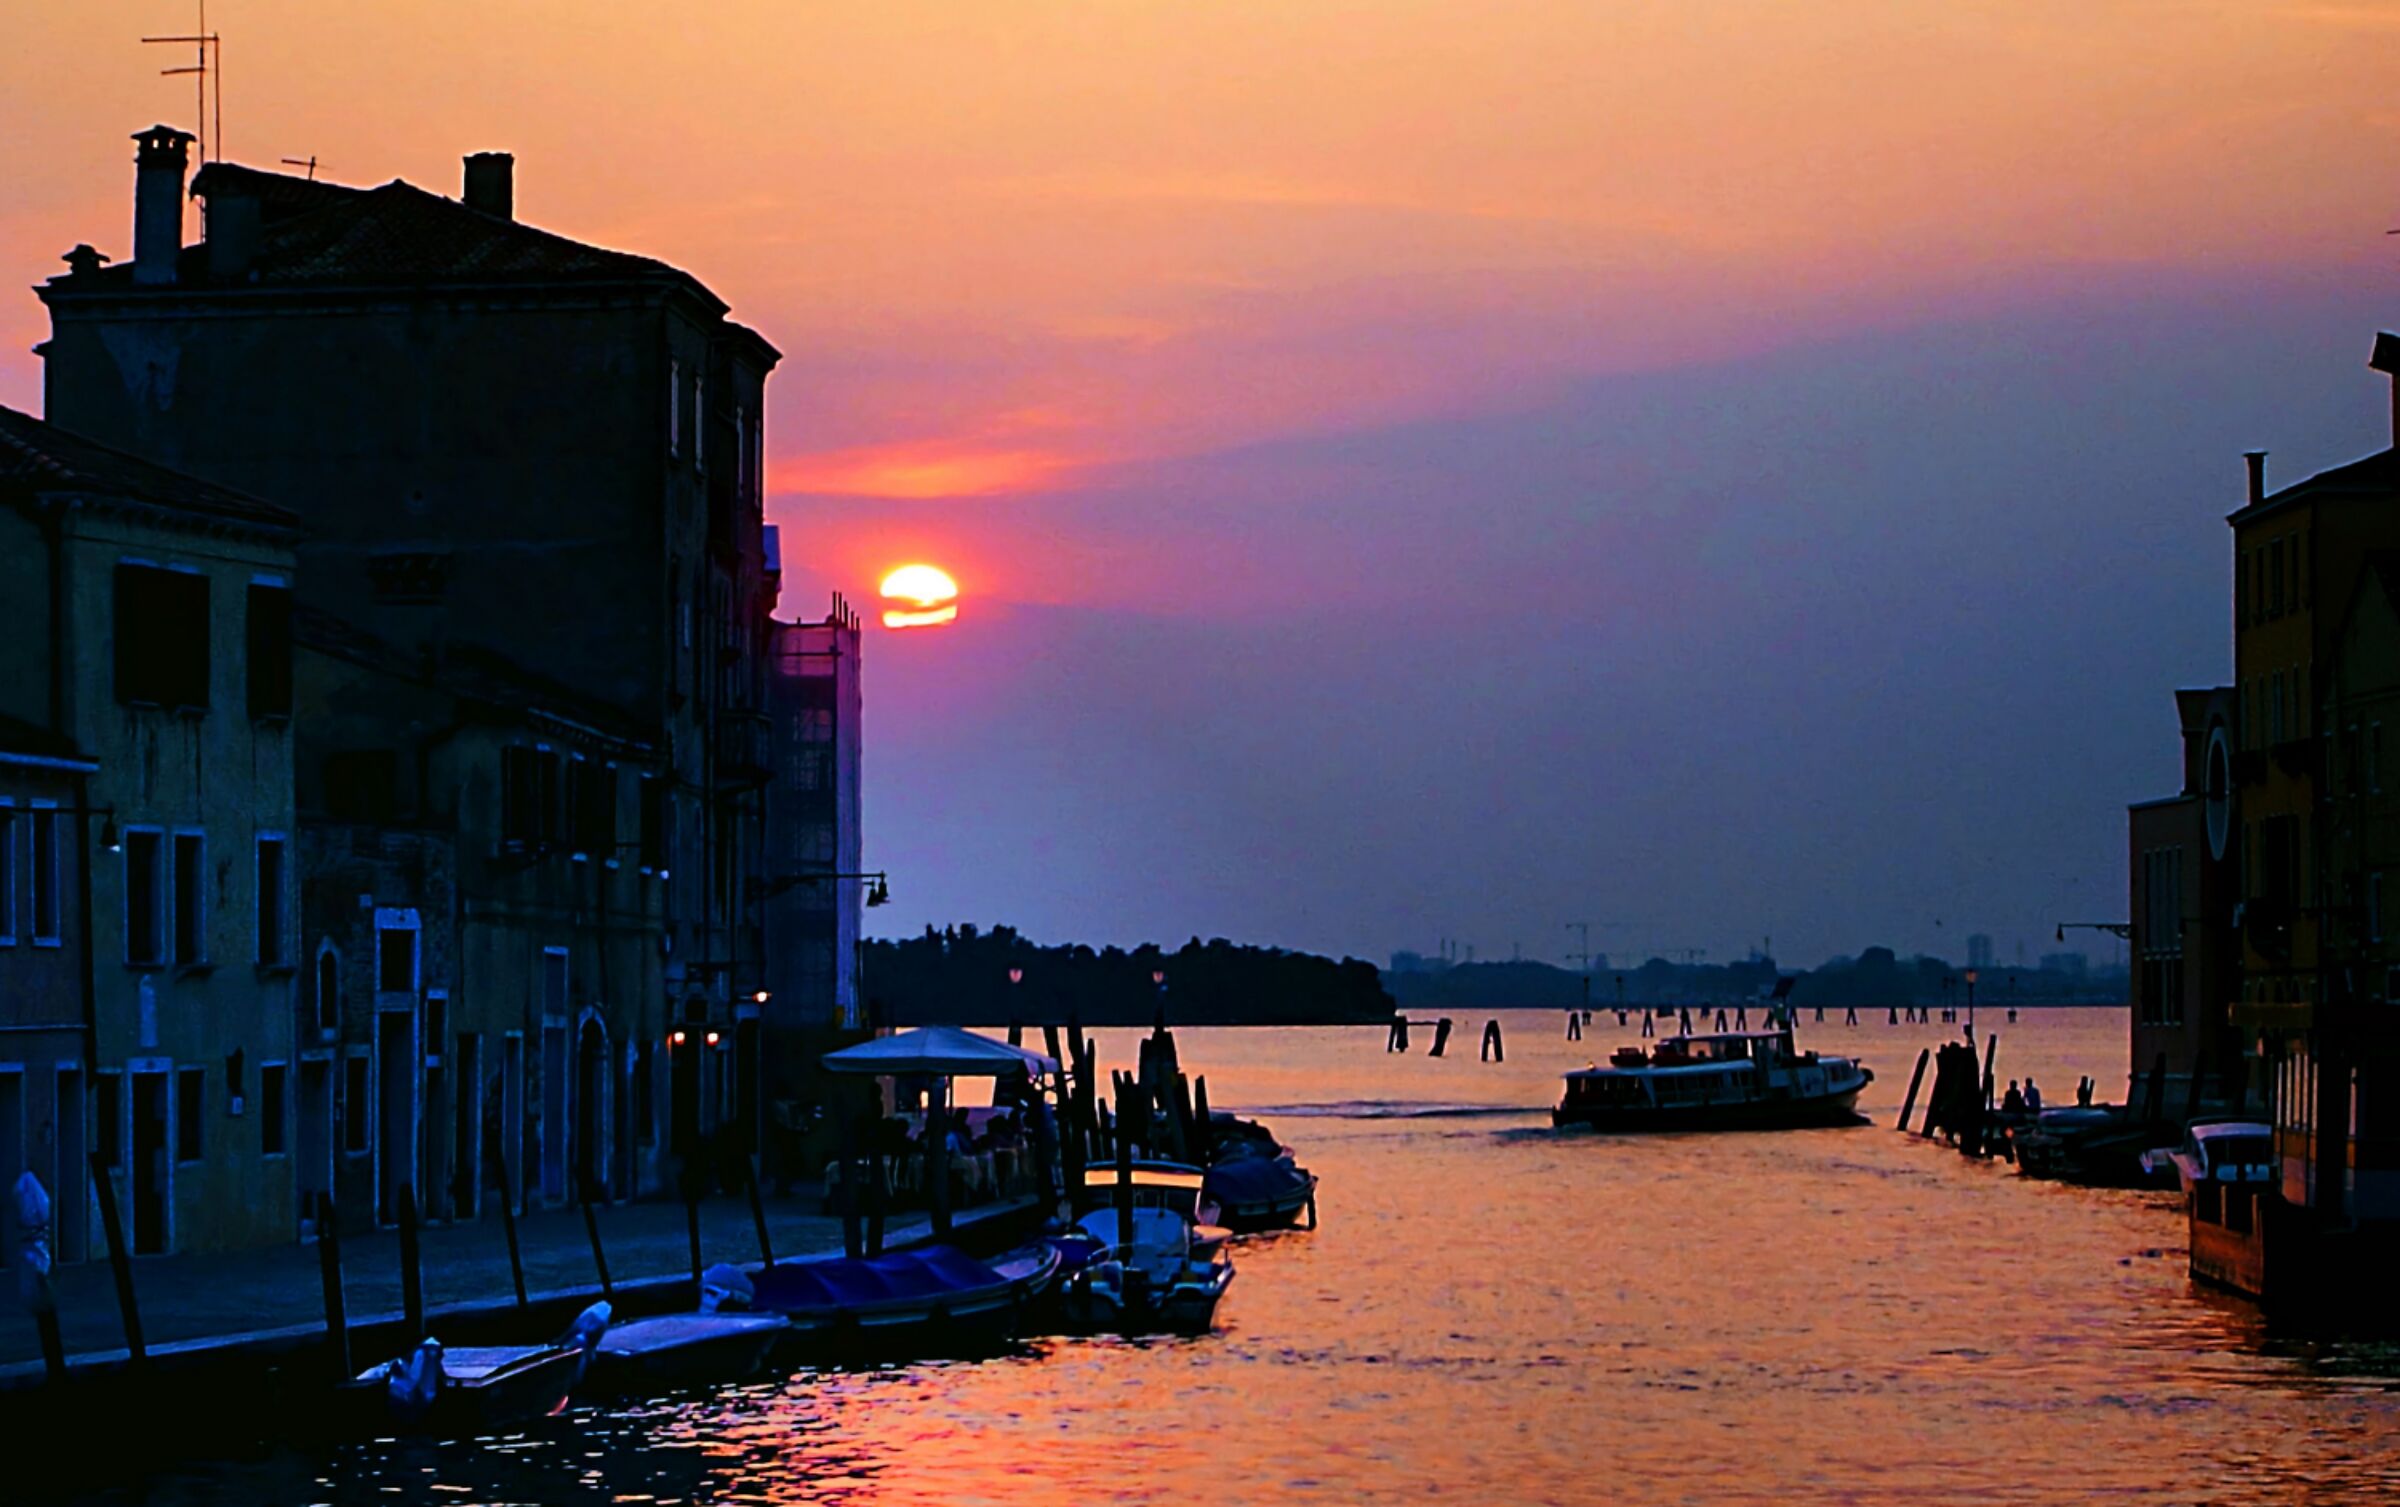 Sunset on one of the canals of Venice...